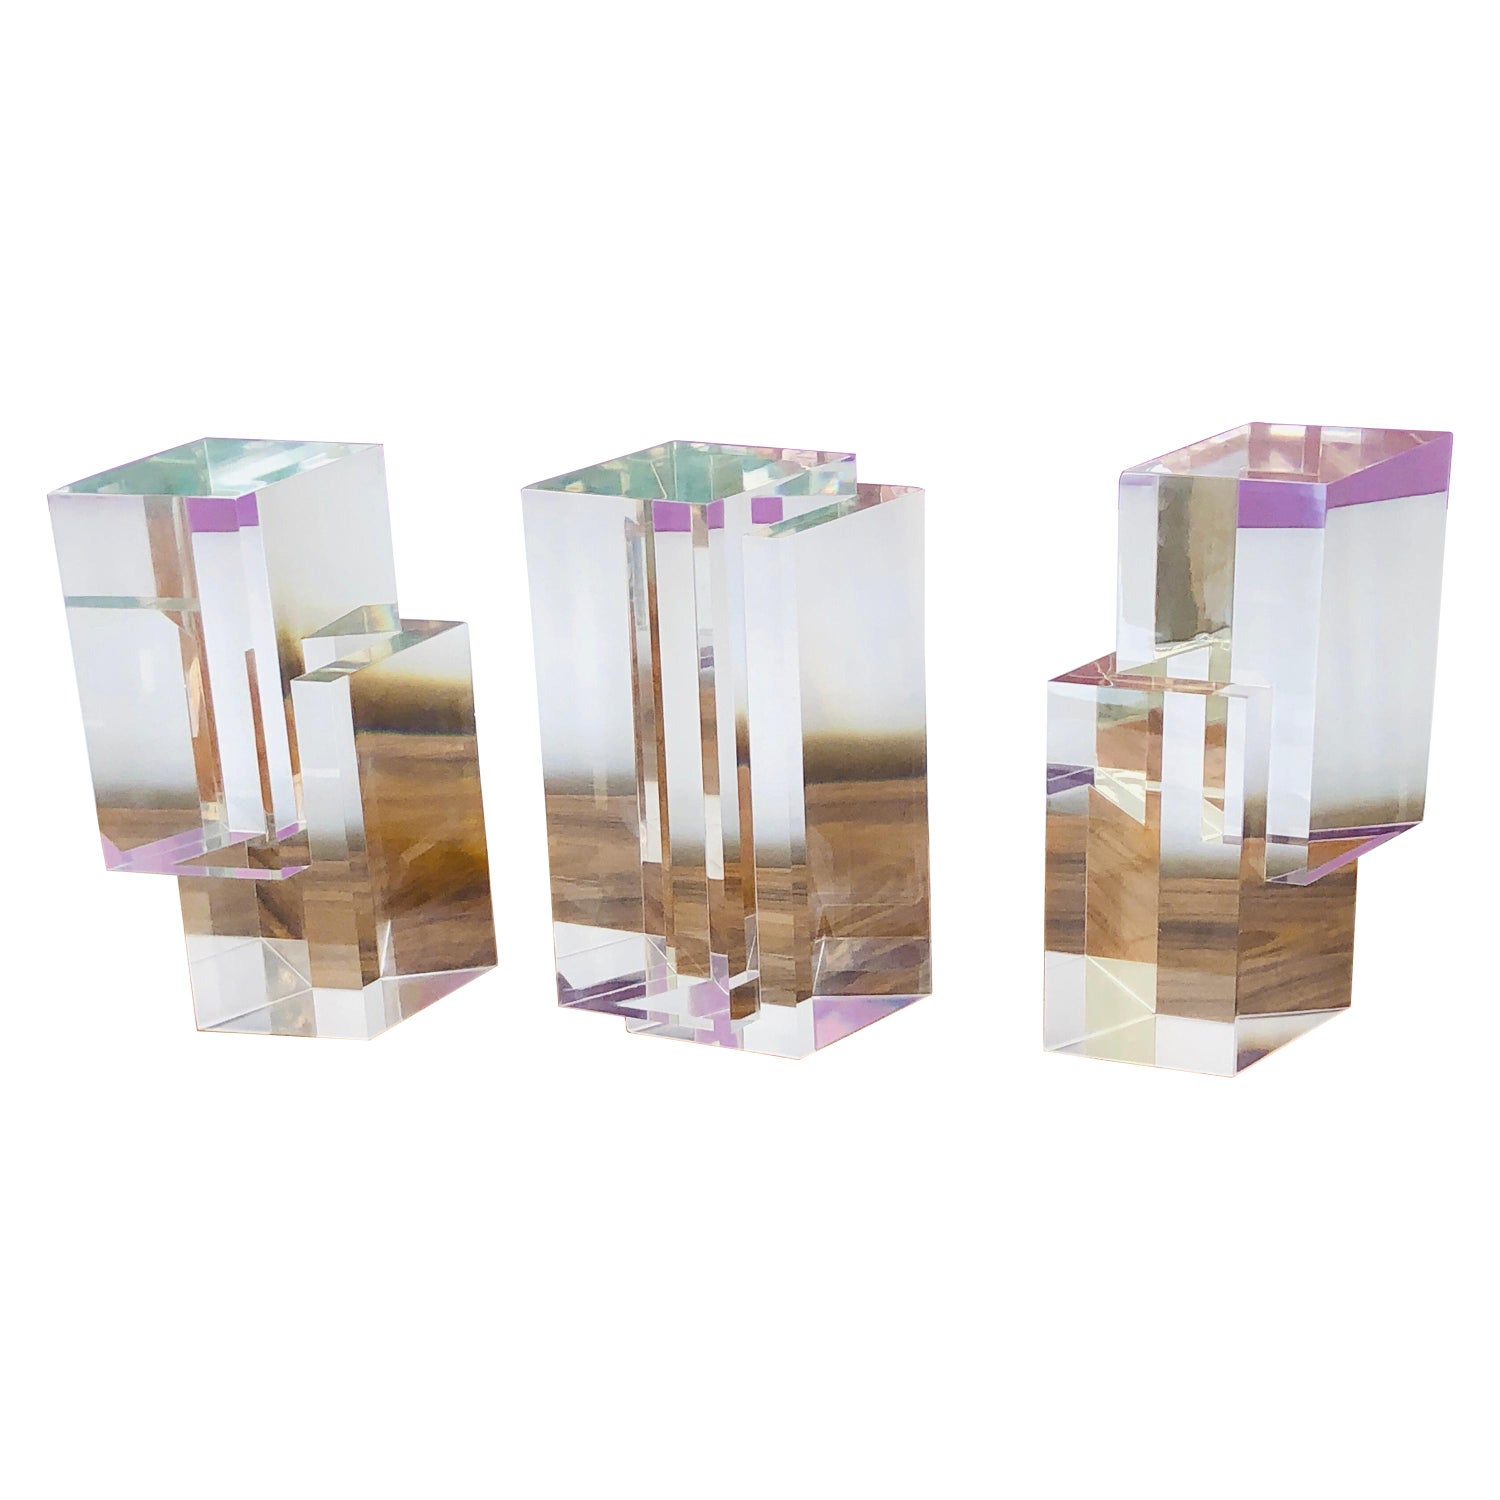 Alessio Tasca Prismatic Lucite Tower Sculpture For Sale at 1stDibs